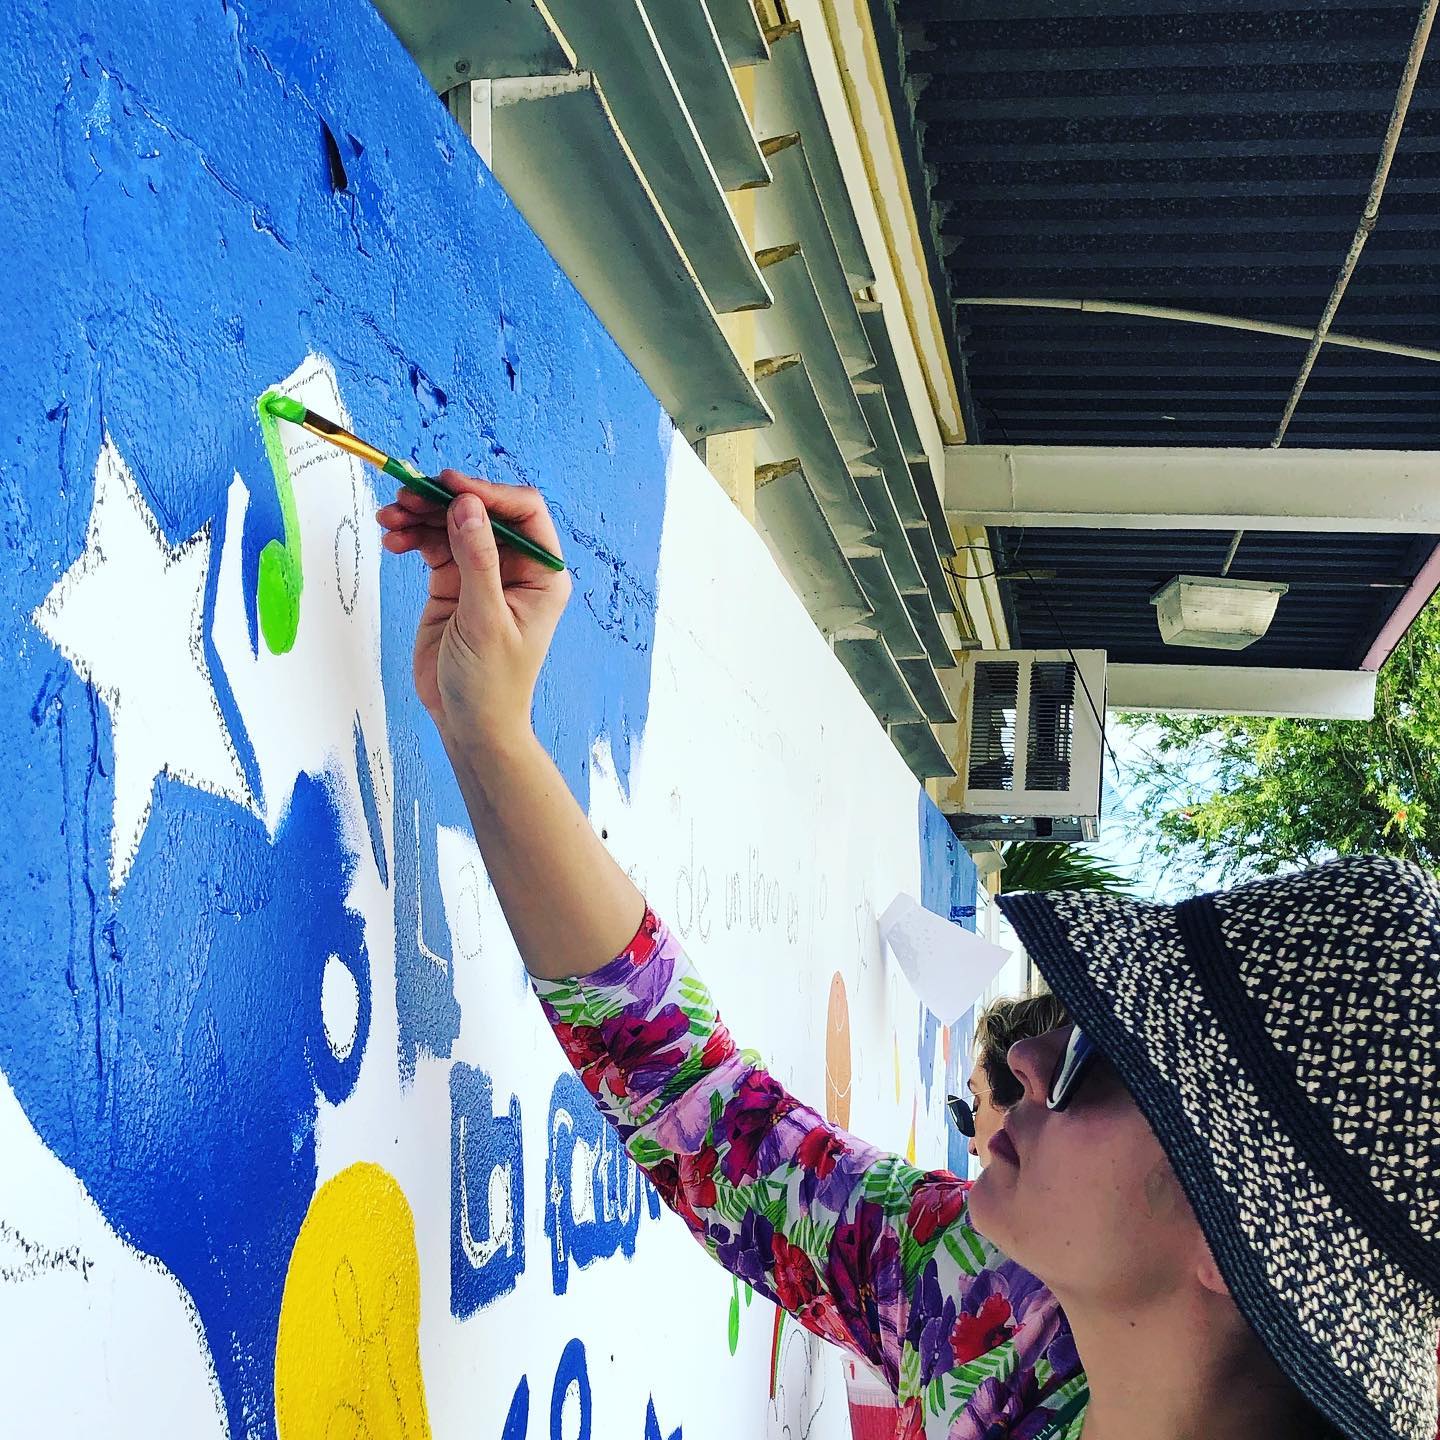 Lacey painting a mural for displaced children in Puerto Rico